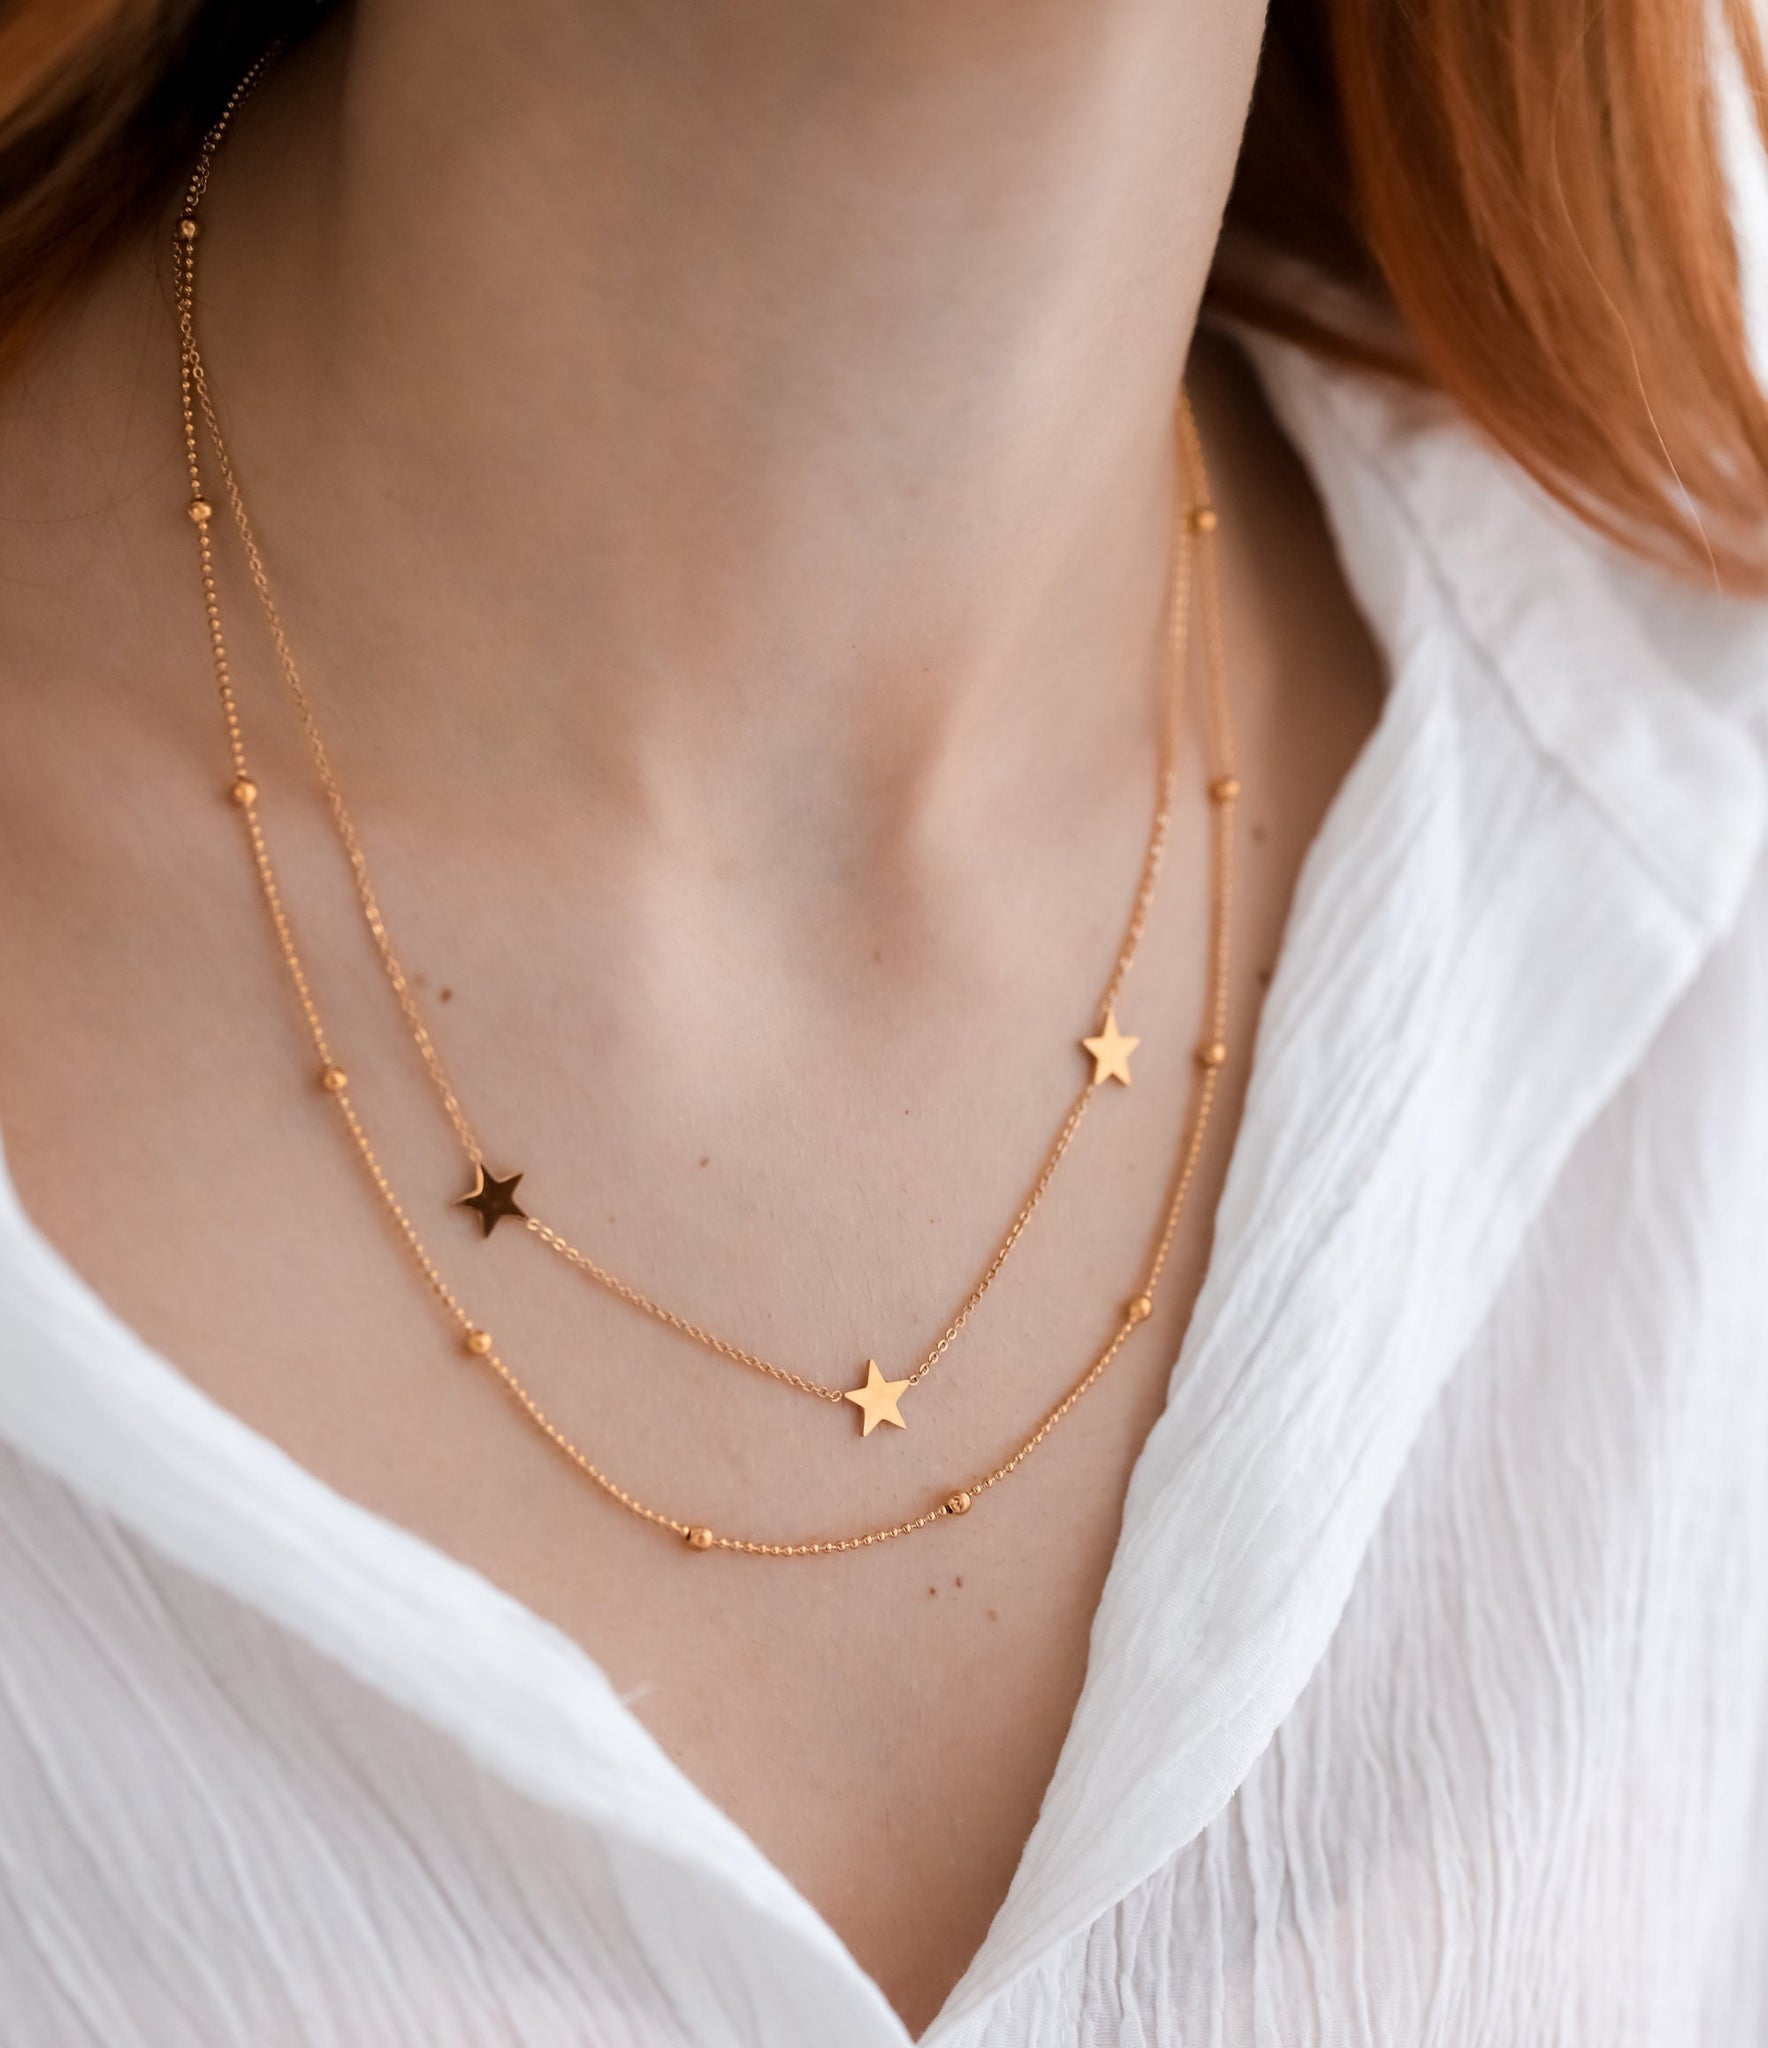 Double Layer Star Necklace, 18K Gold, Gift For Mom, Dainty Necklace, Minimalist Necklace,Star Necklace,Boho Beaded Choker,Necklace for Women